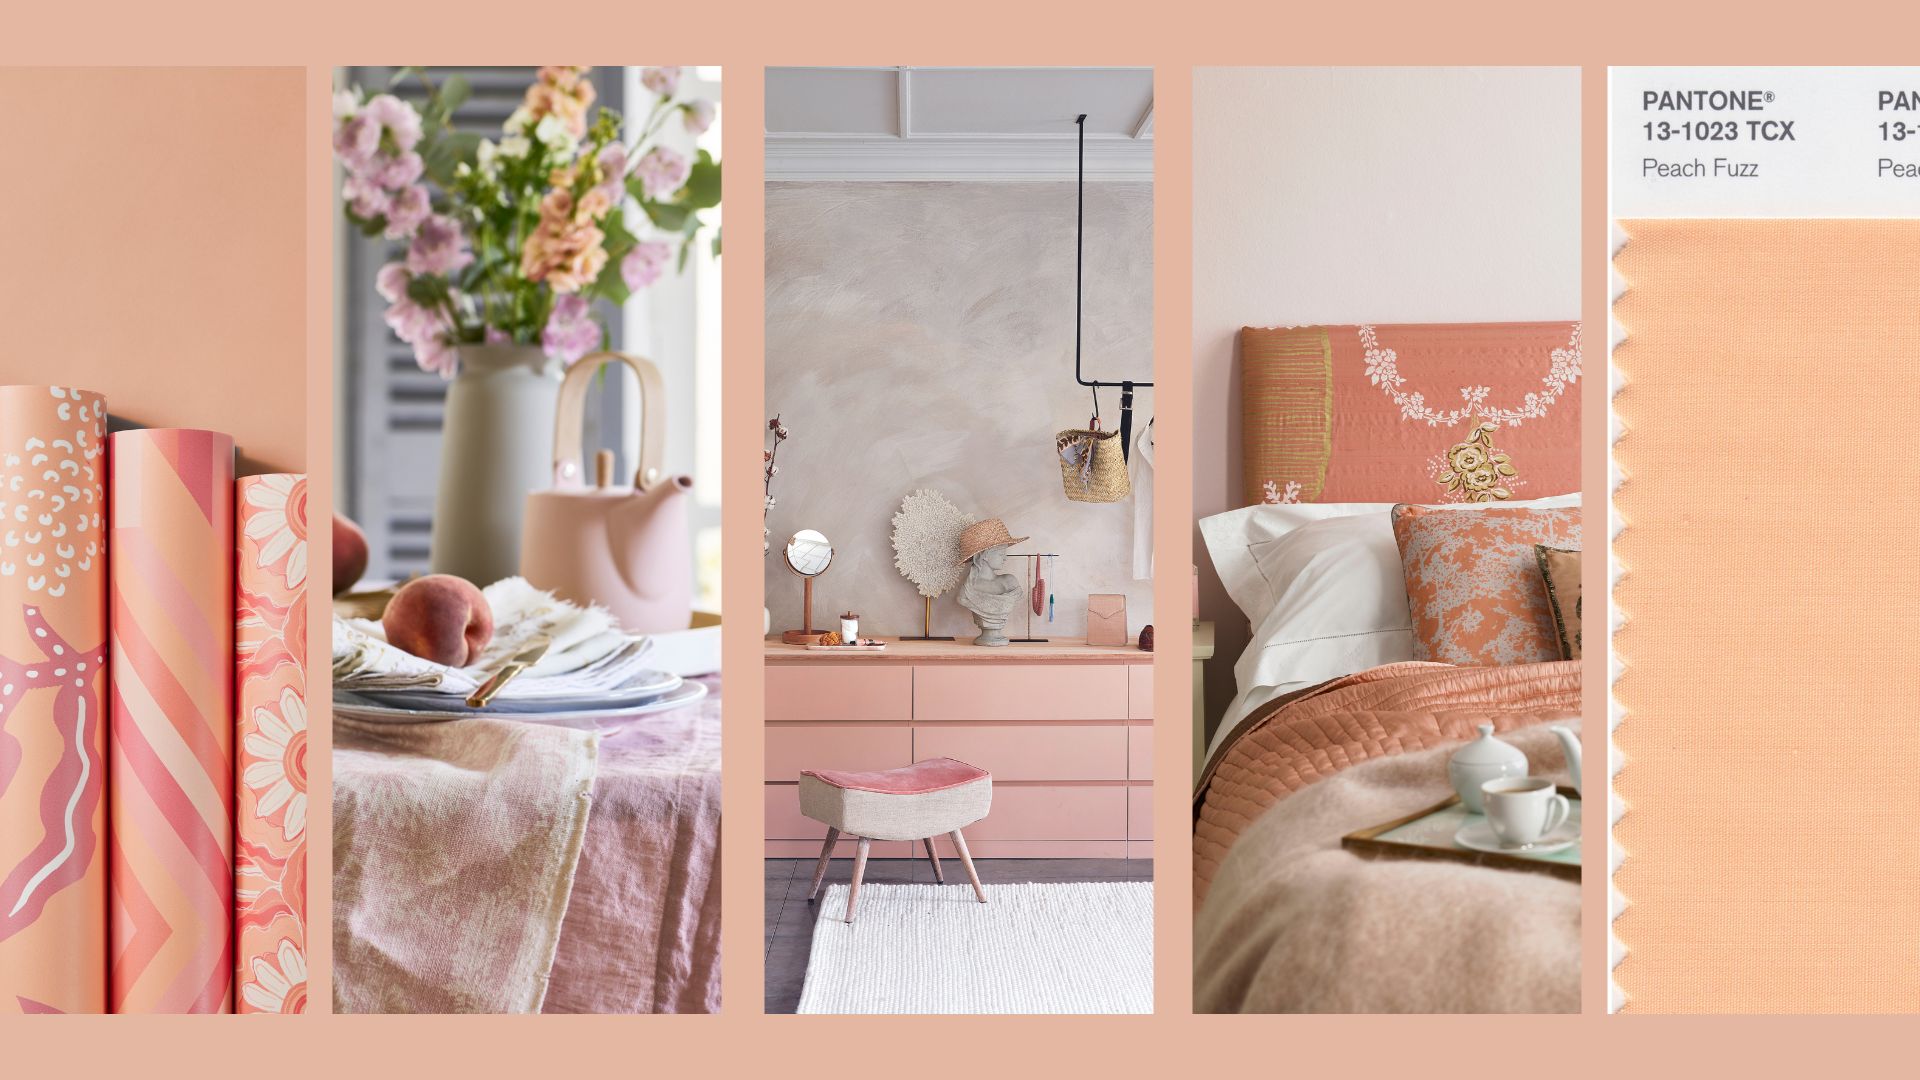 pantone selects 'peach fuzz' as color of the year 2024